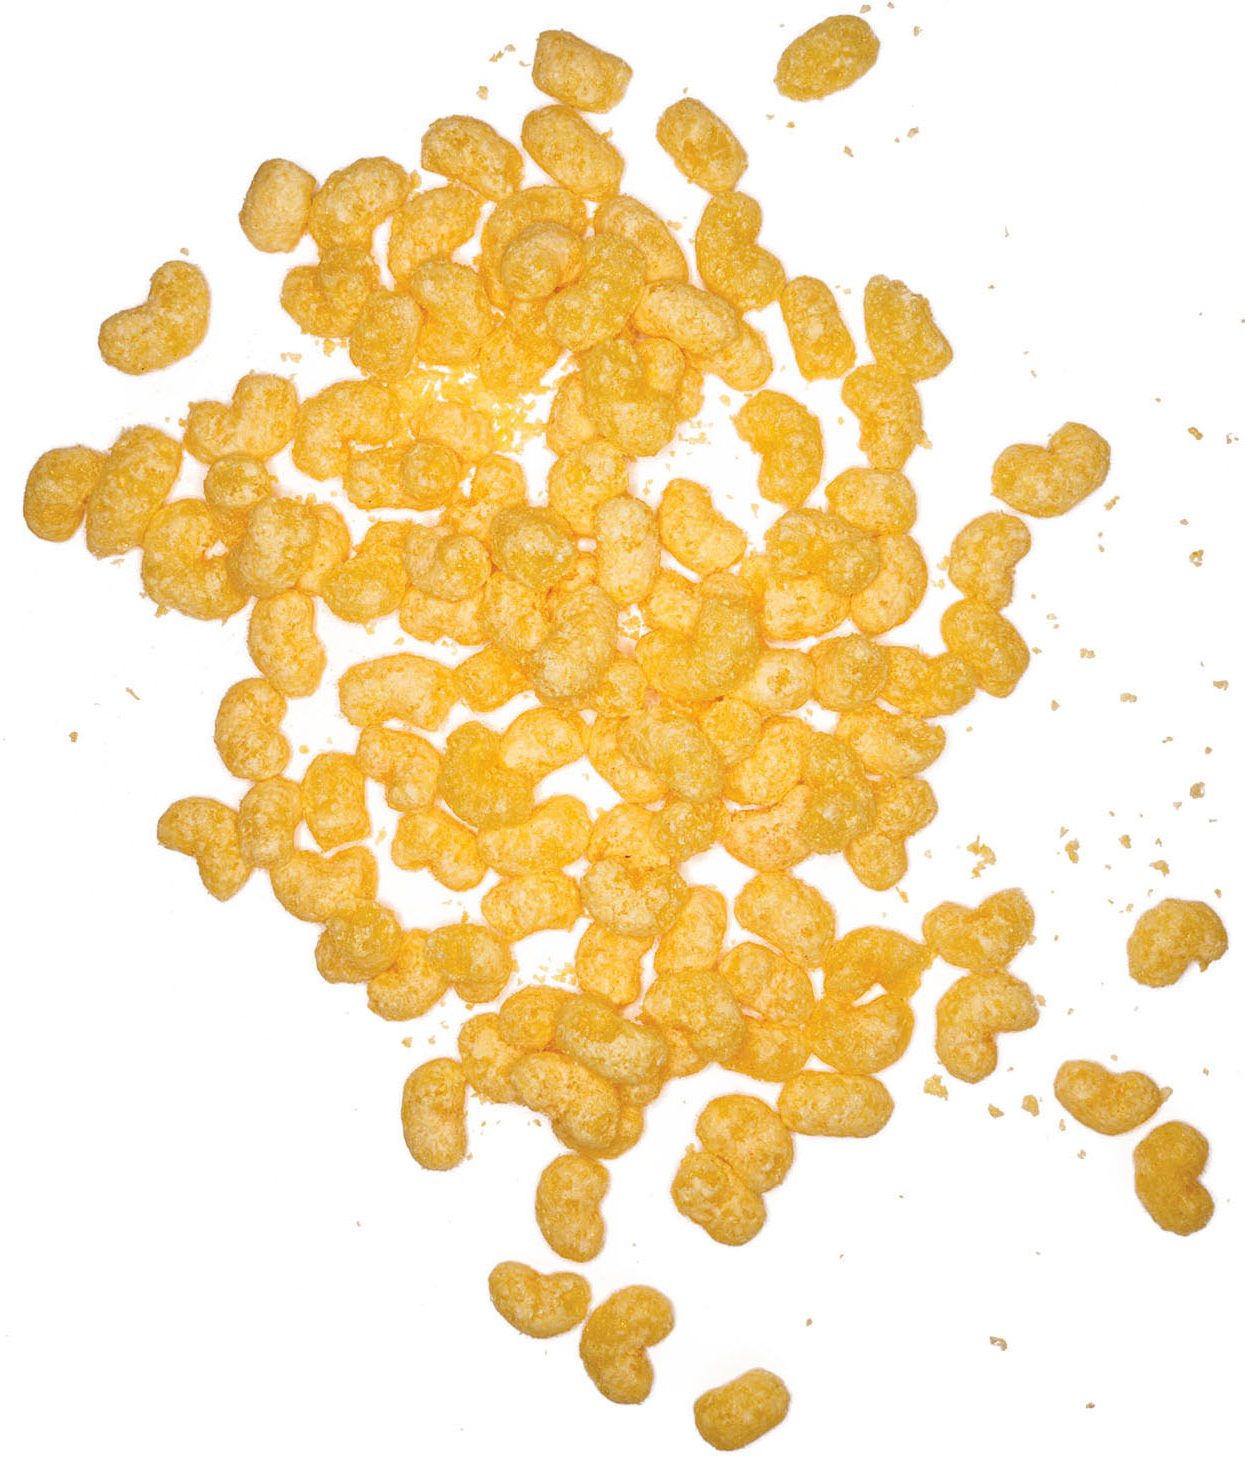 An overhead view of golden yellow beaver nuggets